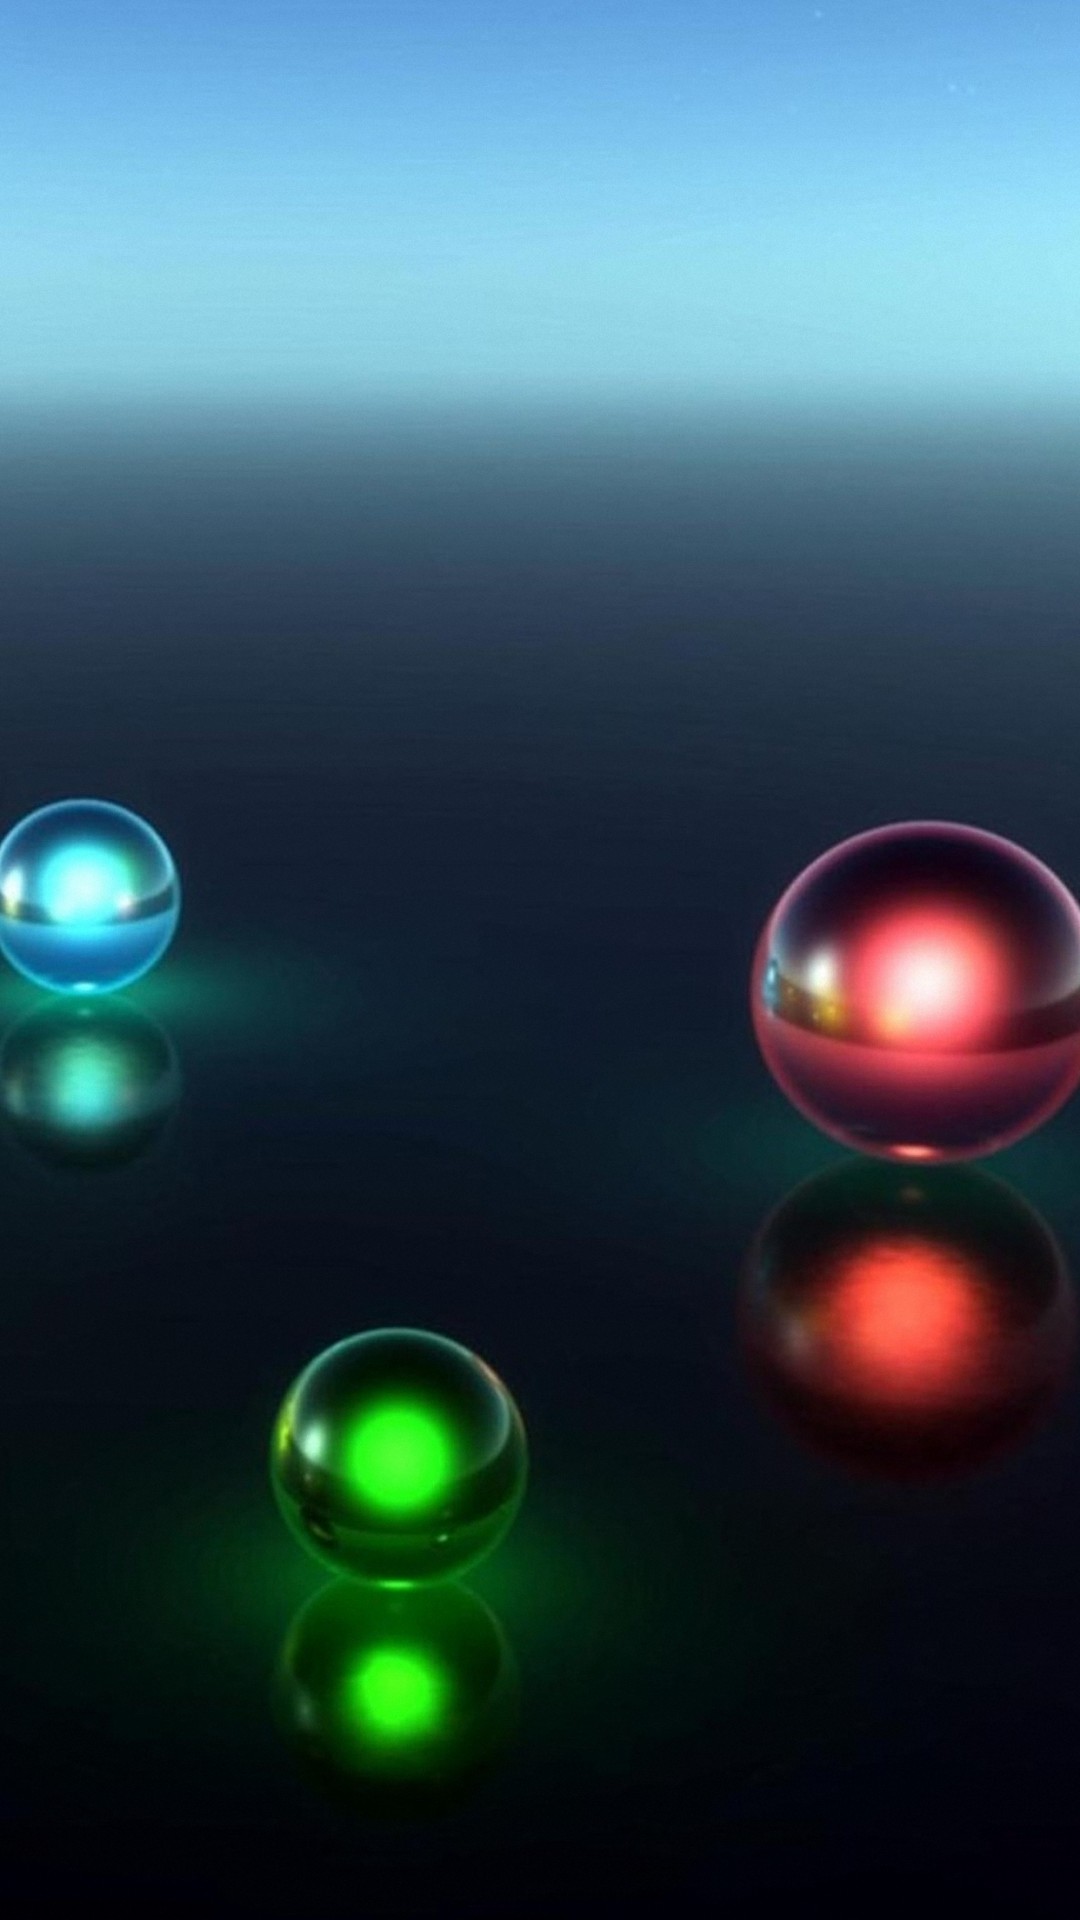 1080x1920 3d color glass ball iphone 6 wallpapers HD